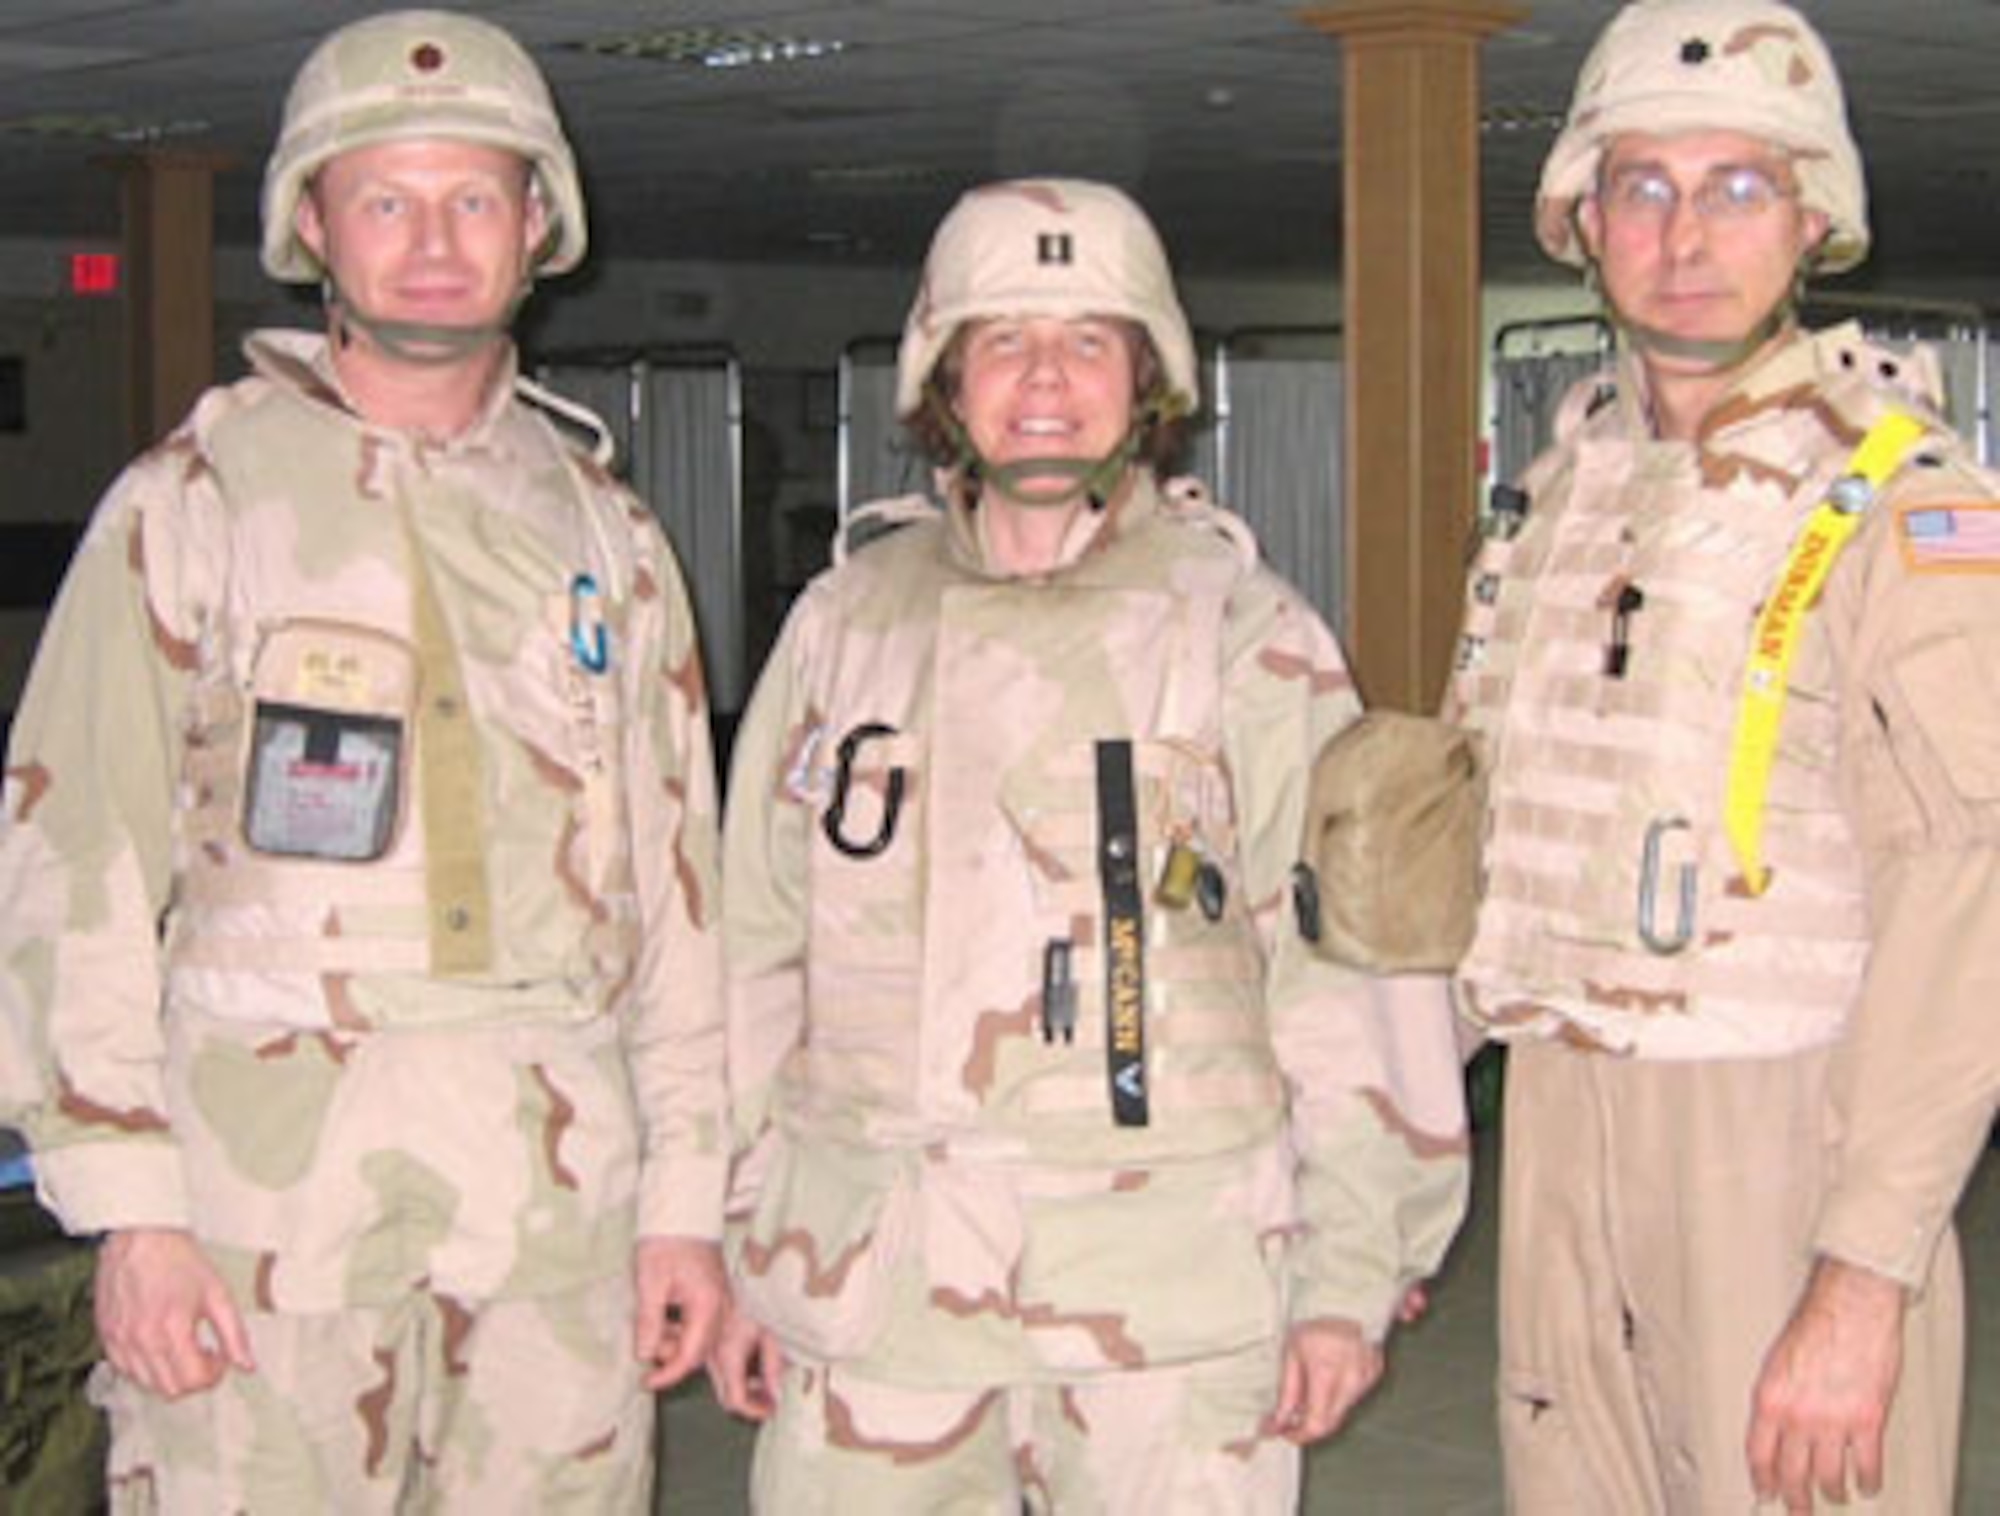 From left, Maj. Robert Rostedt, Maj. Maureen McCann (then still a captain) and Lt. Col. Robert Dorman cared for patients in Balad, Iraq. The three are Air Force reservists assigned to the 439th Aeromedical Staging Squadron at Westover Air Reserve Base, Mass. (Courtesy photo)